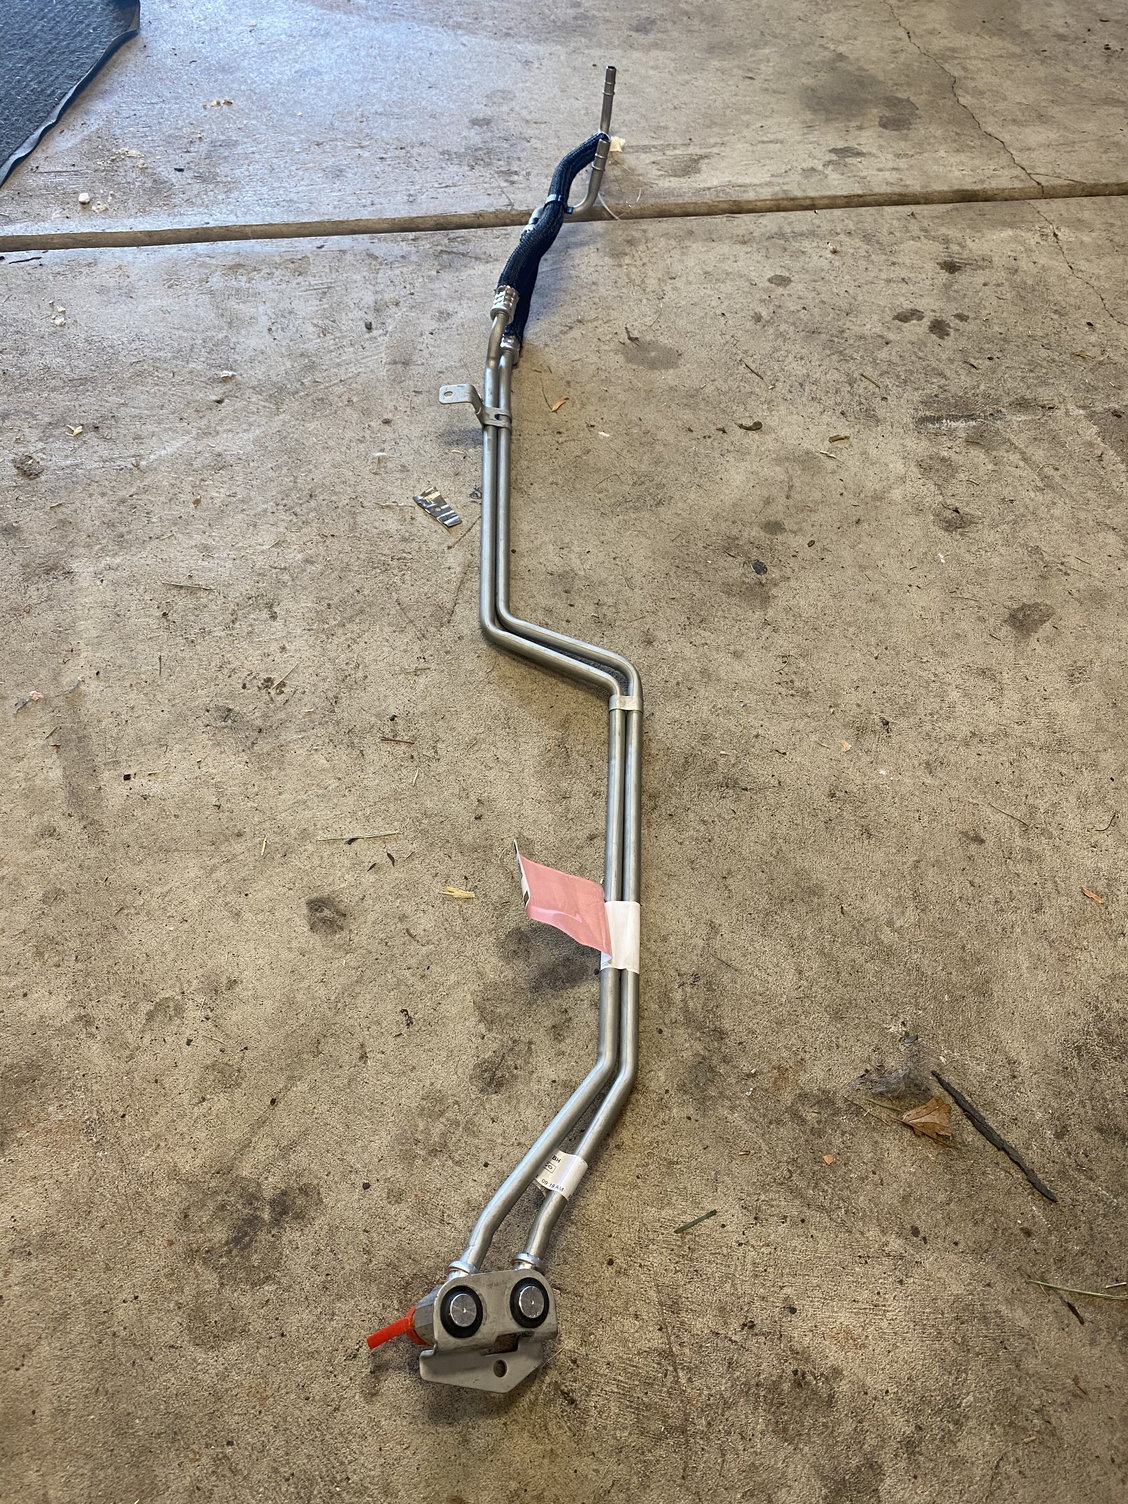 2011 6.7 power stroke trans cooler lines replacement - Ford Truck